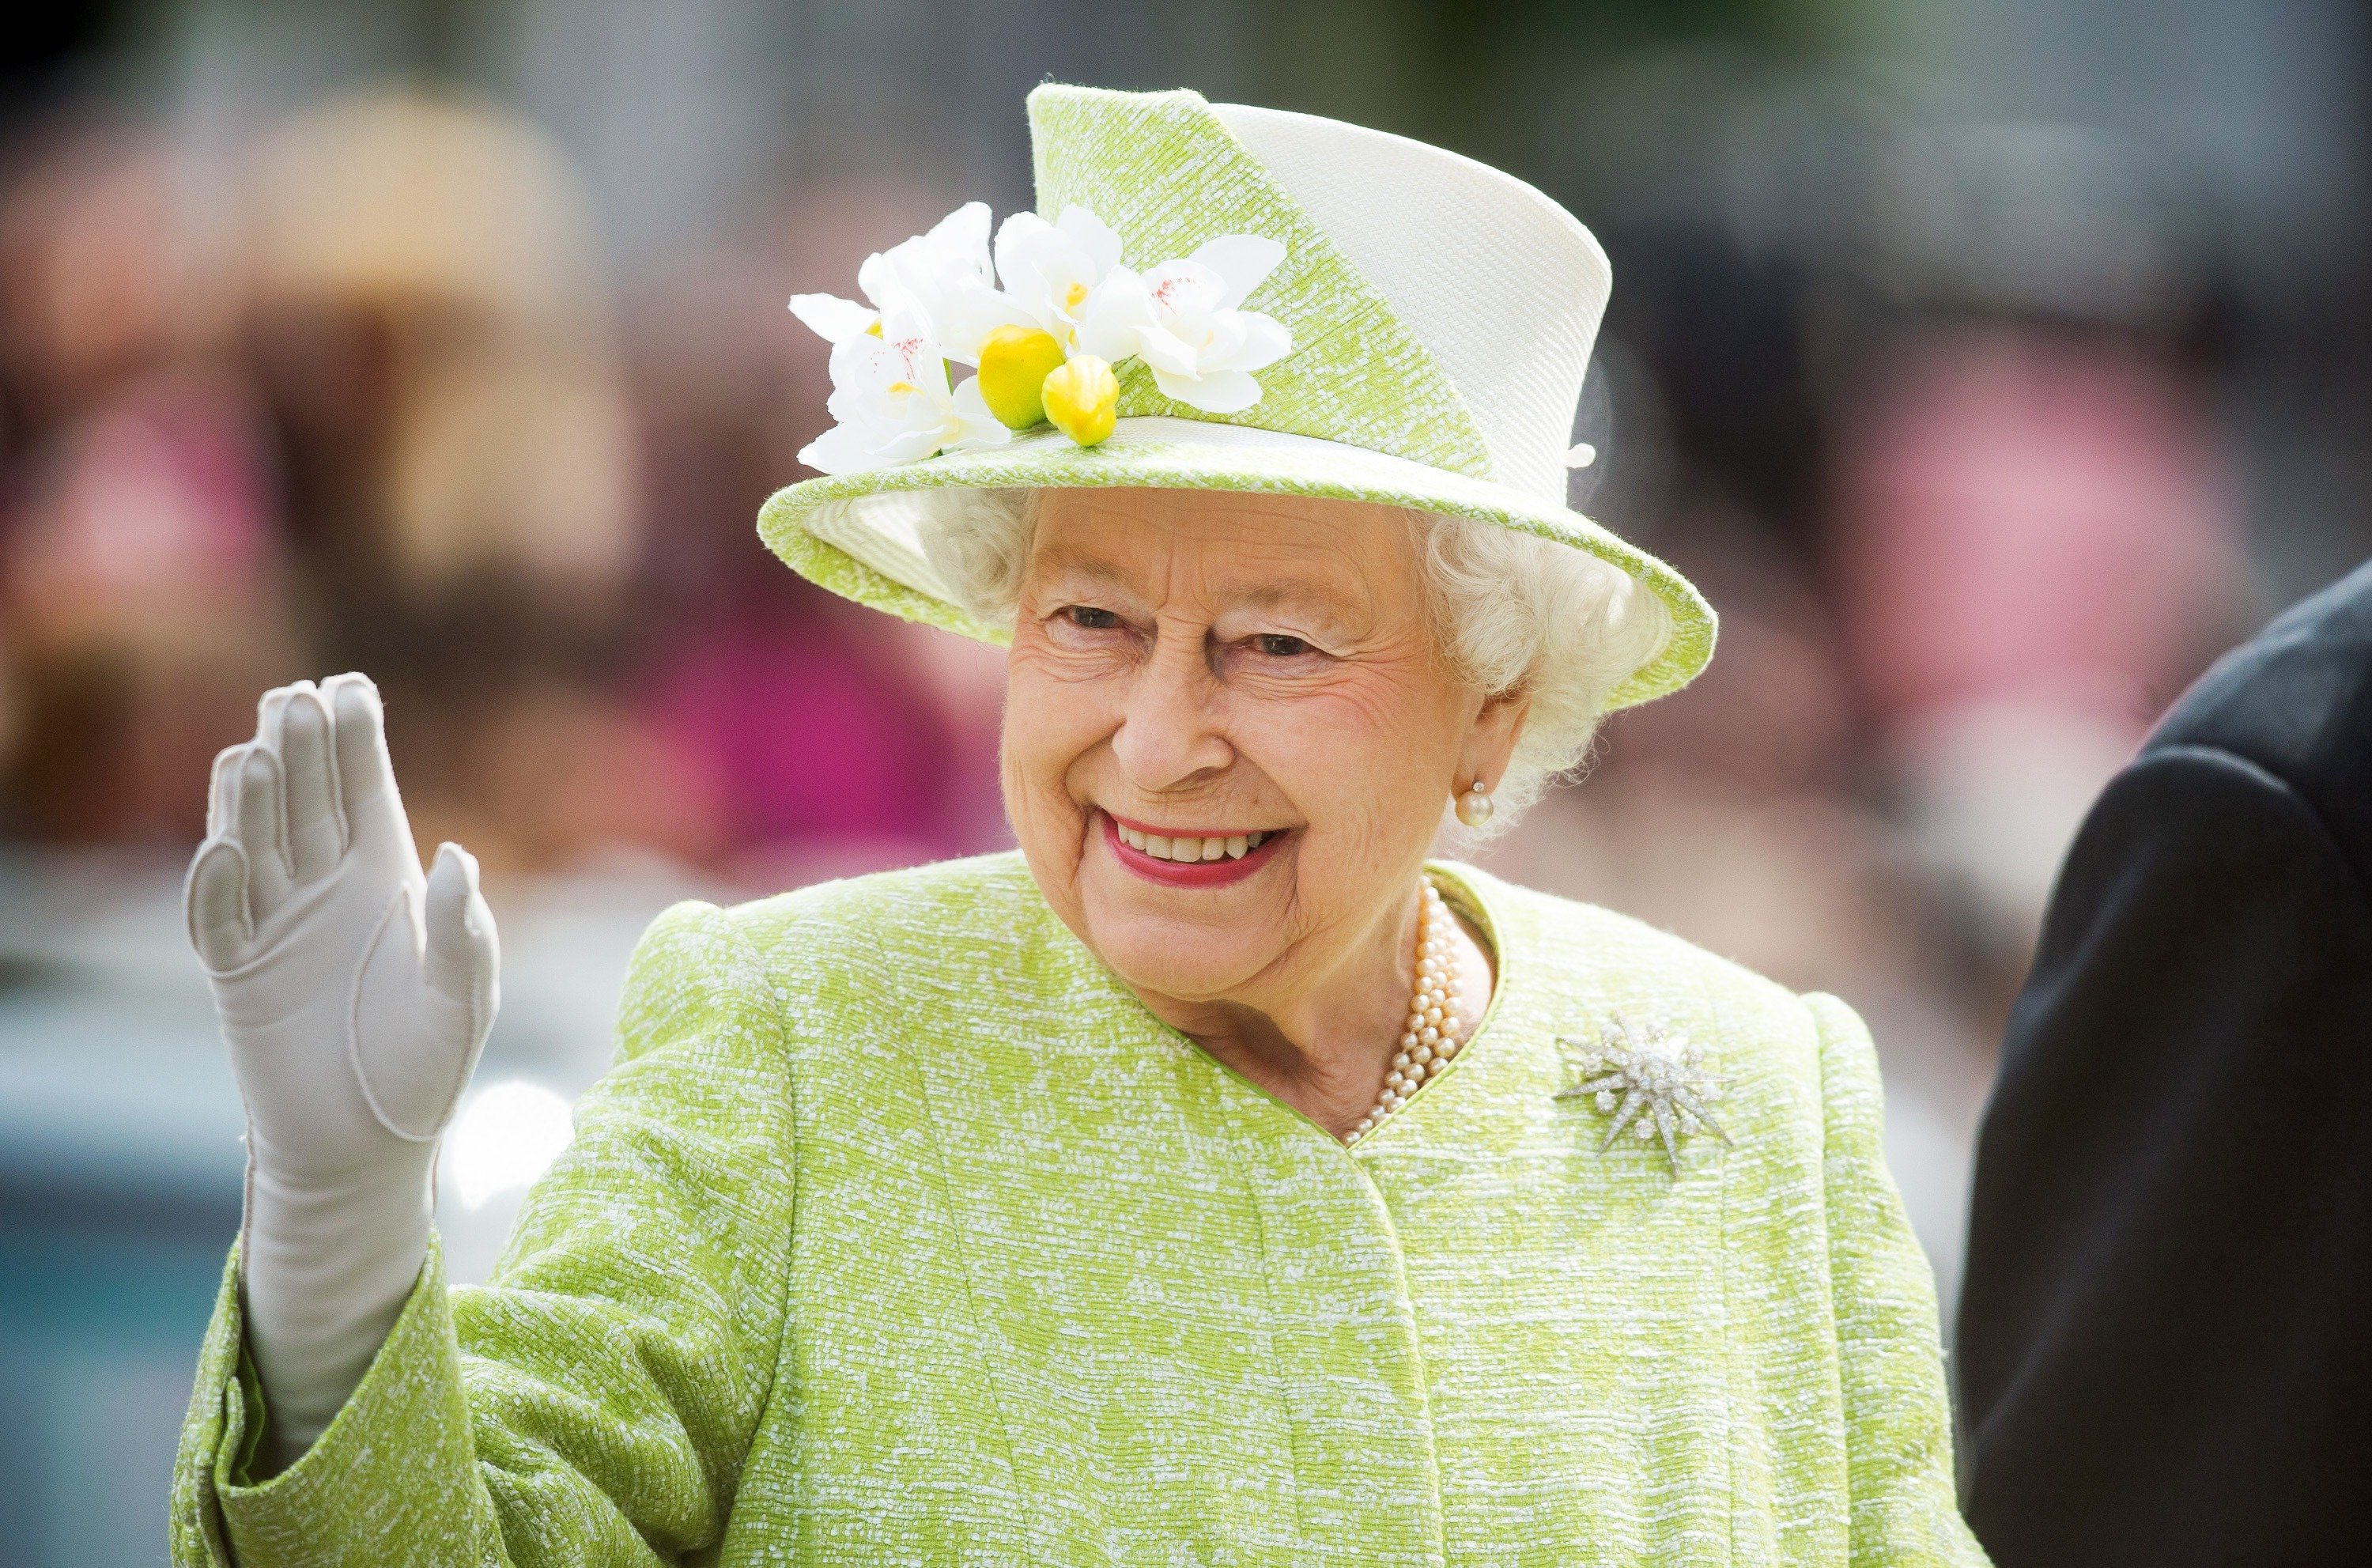 Queen Elizabeth II waves during a walkabout around Windsor on her 90th Birthday on April 21, 2016, in Windsor, England. | Source: Getty Images